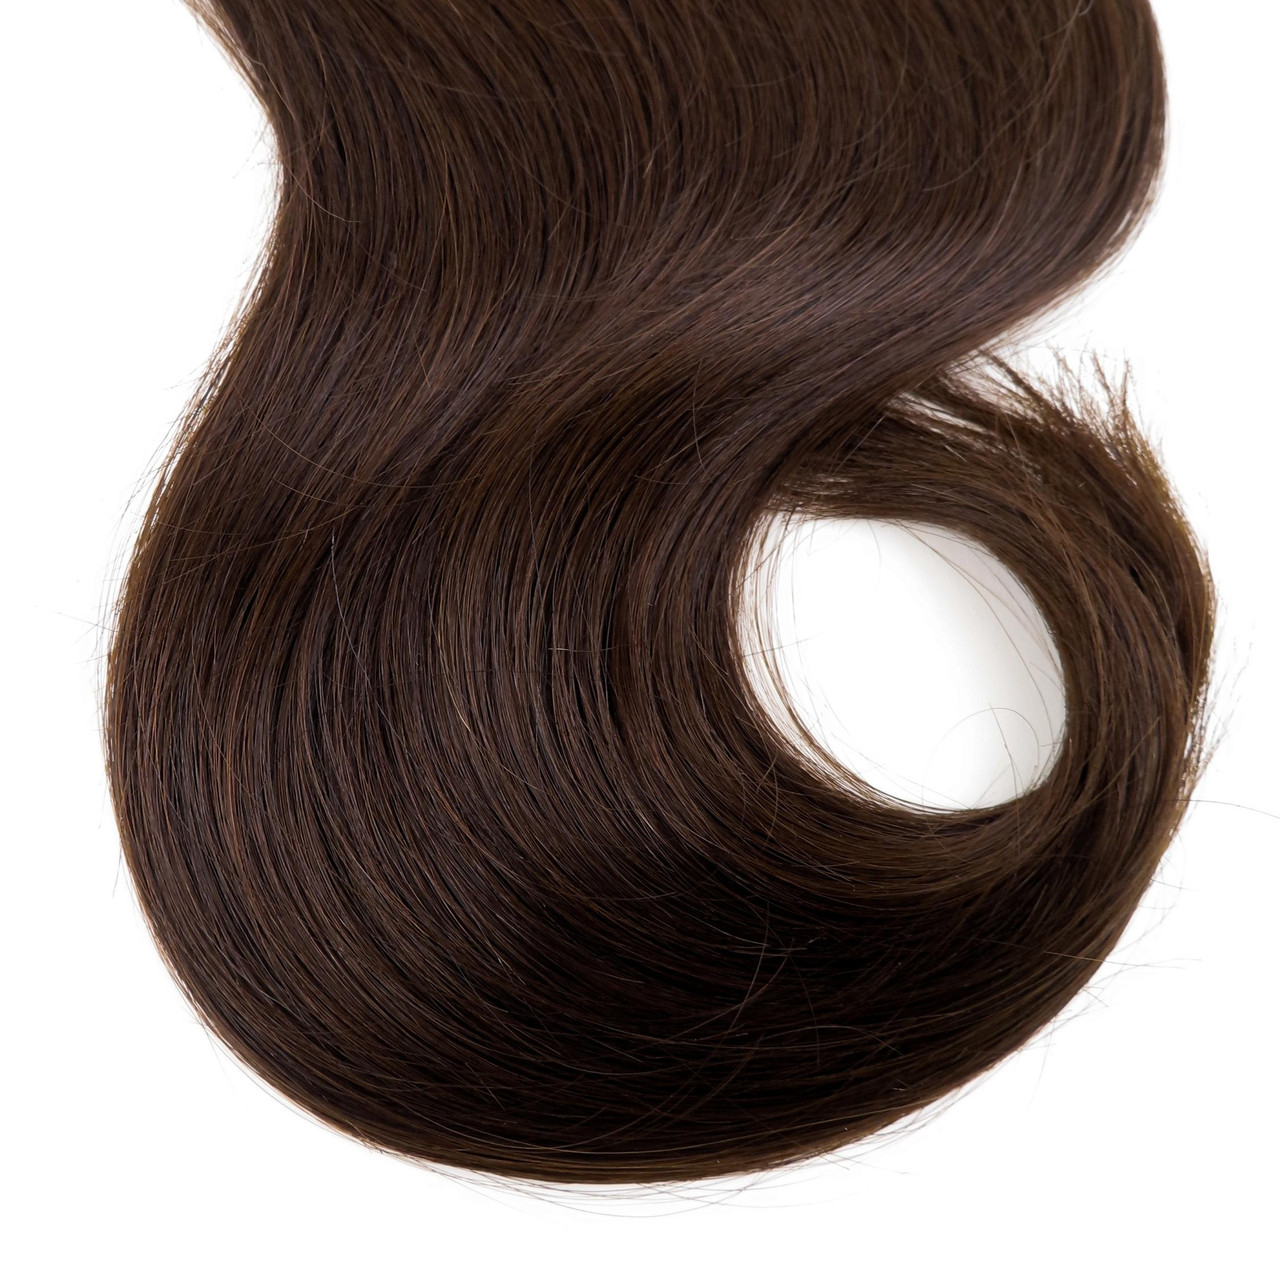 Bel Air Brunette Fill In Extensions Cashmere Hair